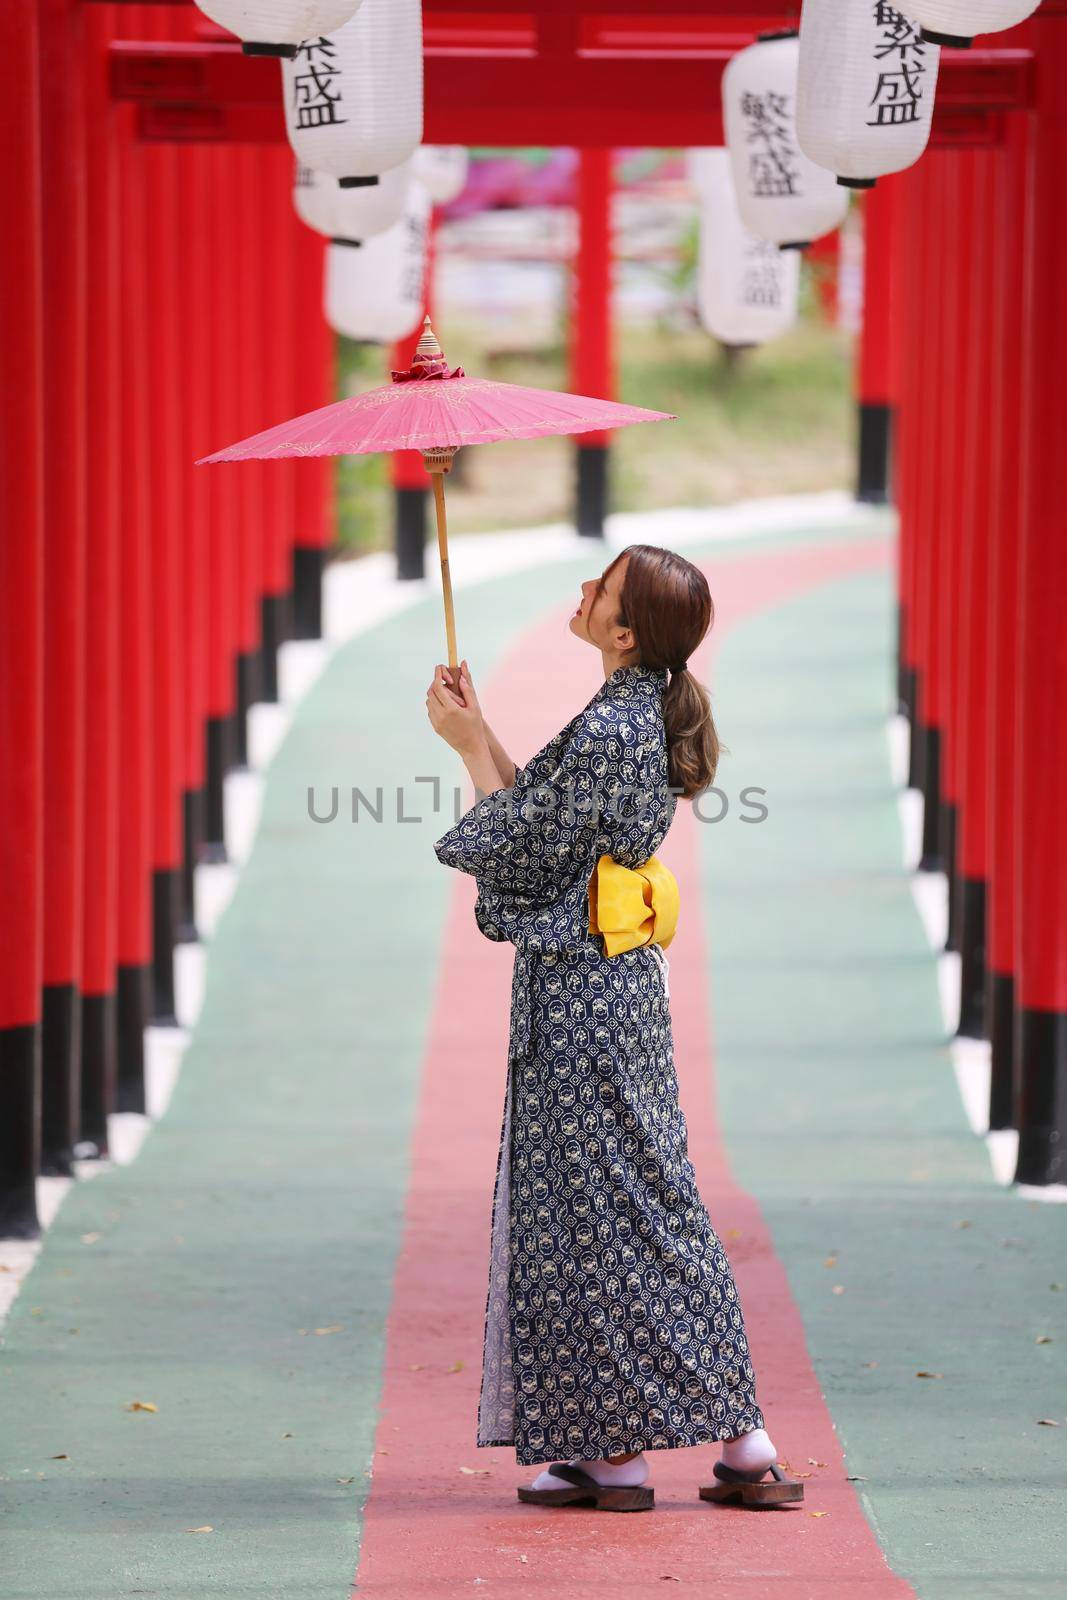 woman in kimono holding umbrella walking into at the shrine red gate, in Japanese garden. by chuanchai